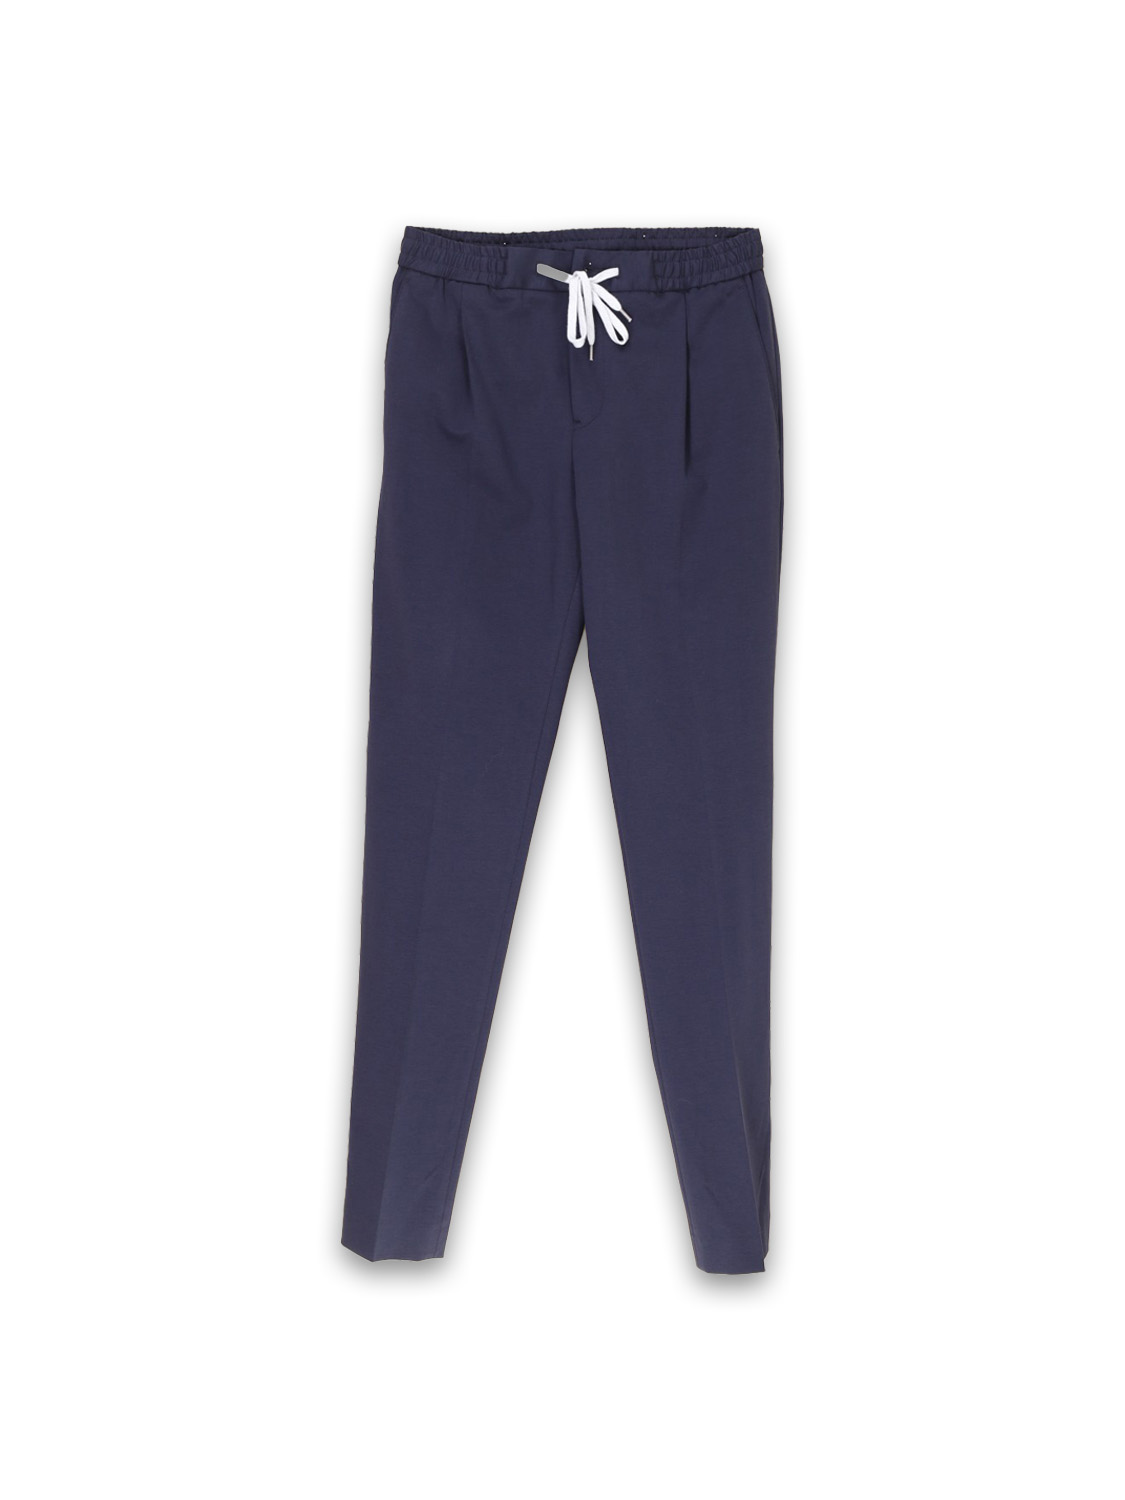 Stretch – sporty cotton blend trousers 